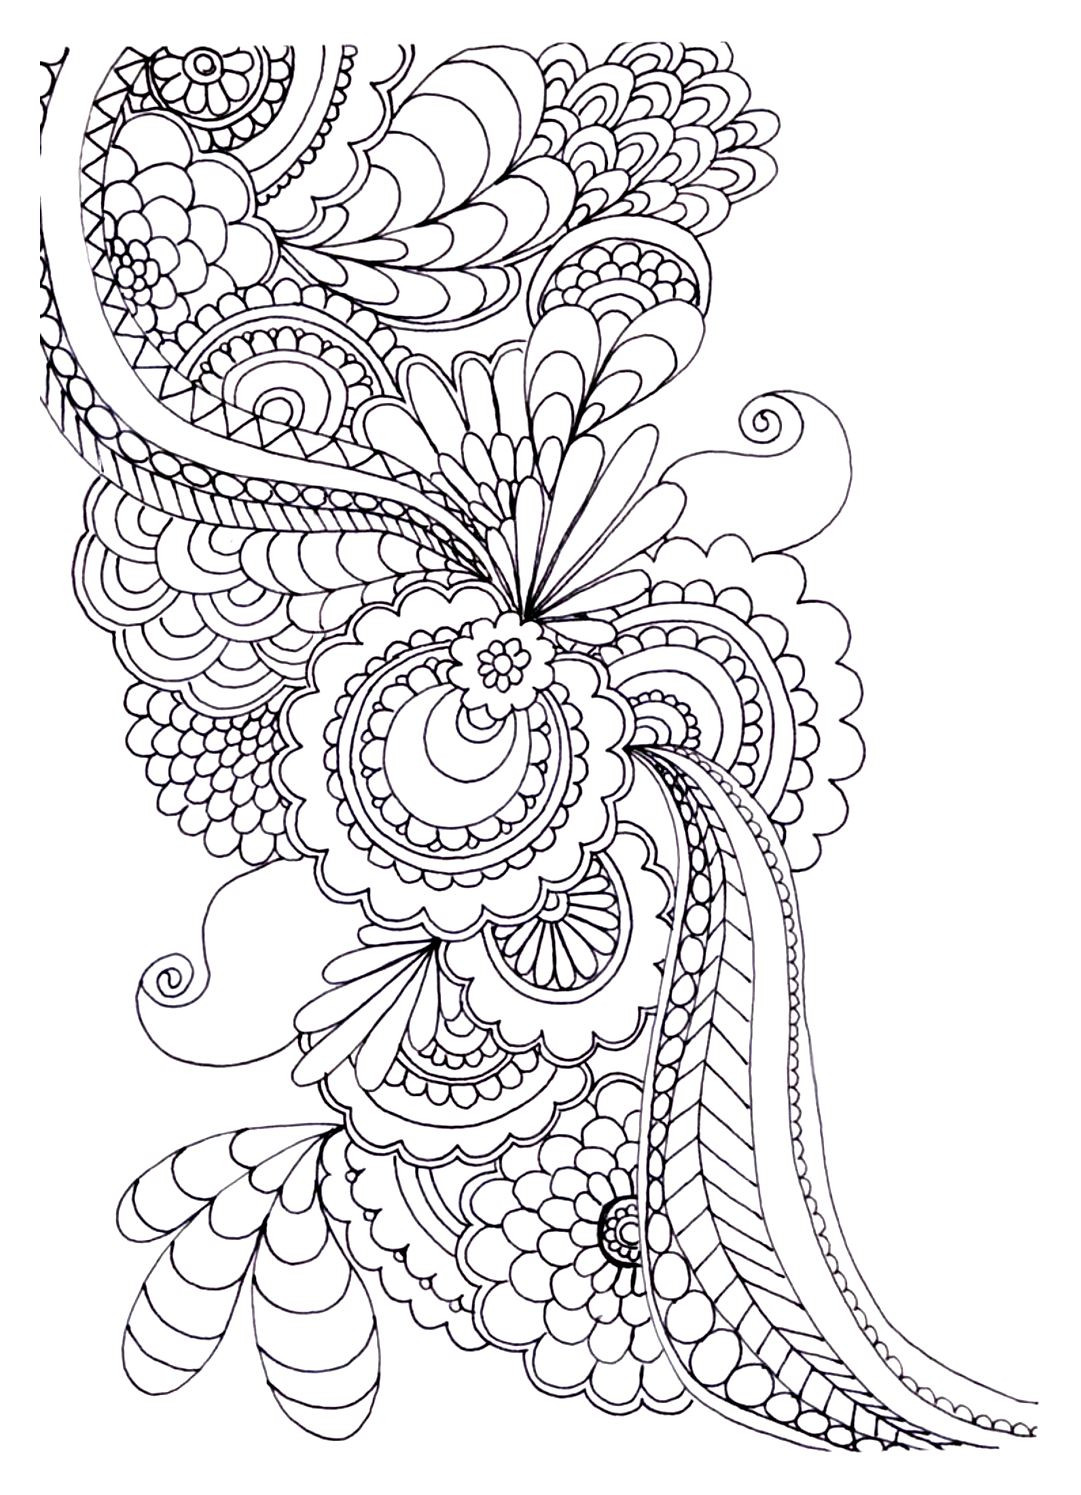 Adult Flower Coloring Pages
 20 Free Adult Colouring Pages The Organised Housewife